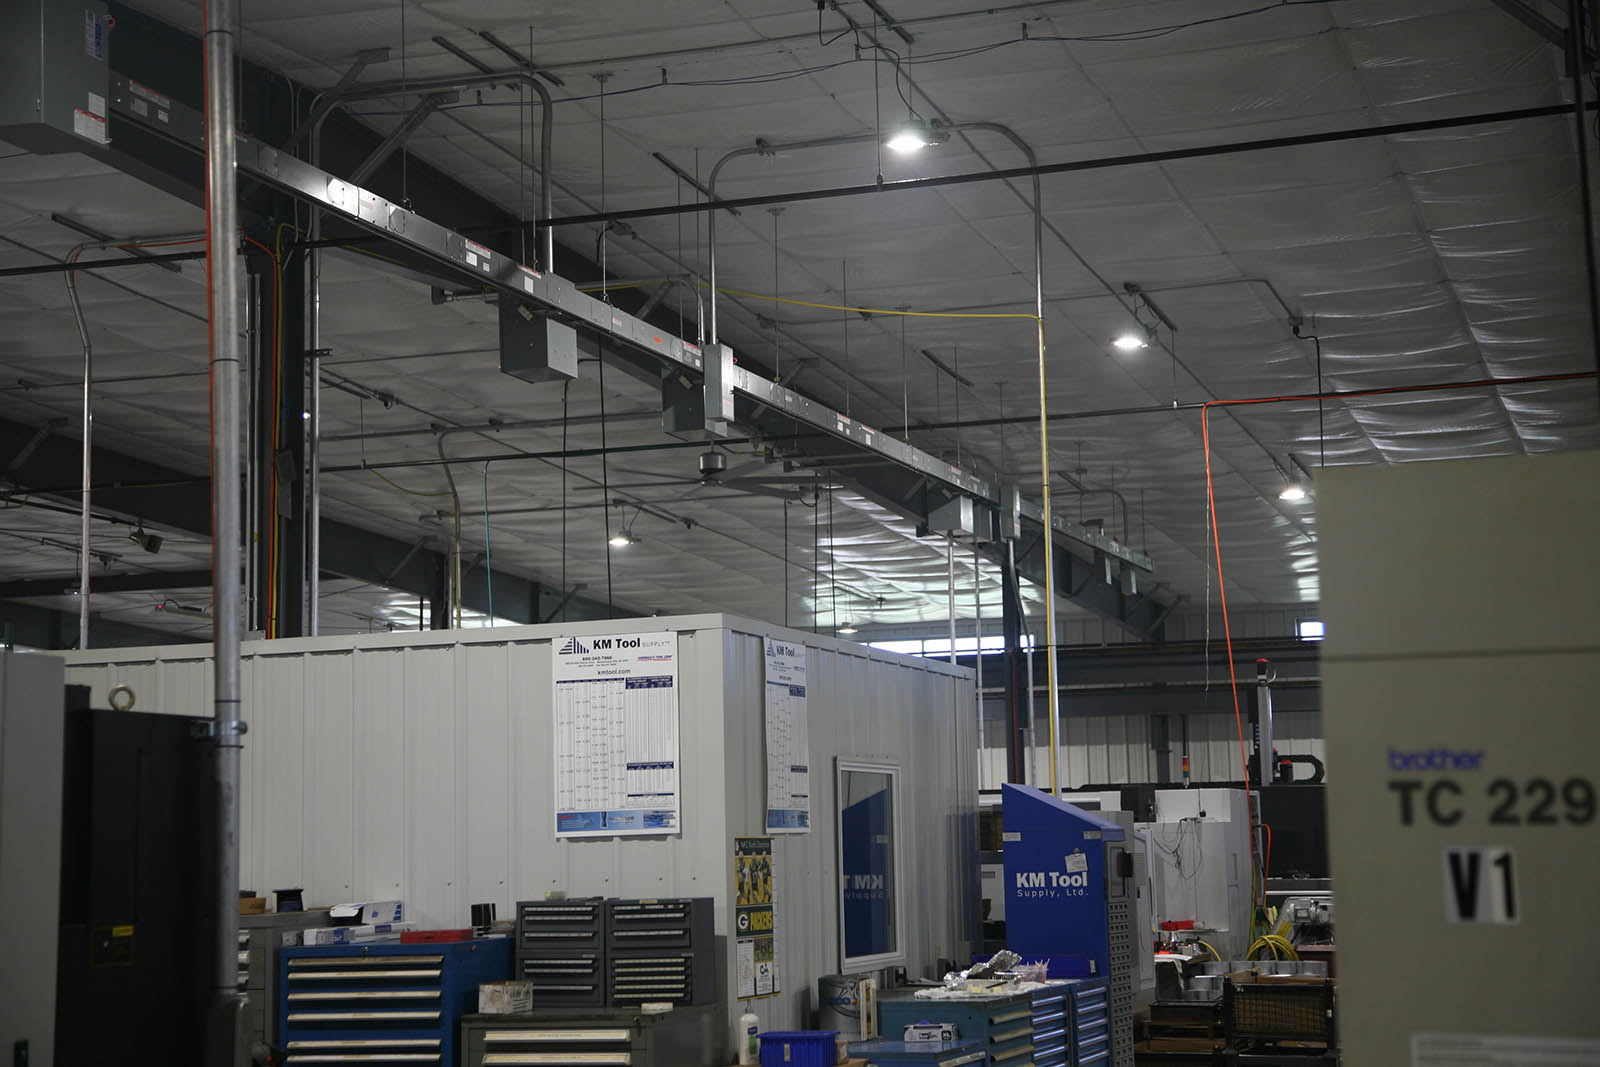 Overhead electrical conduit powering CNC Machines at Pro Products in Sturgeon Bay, WI